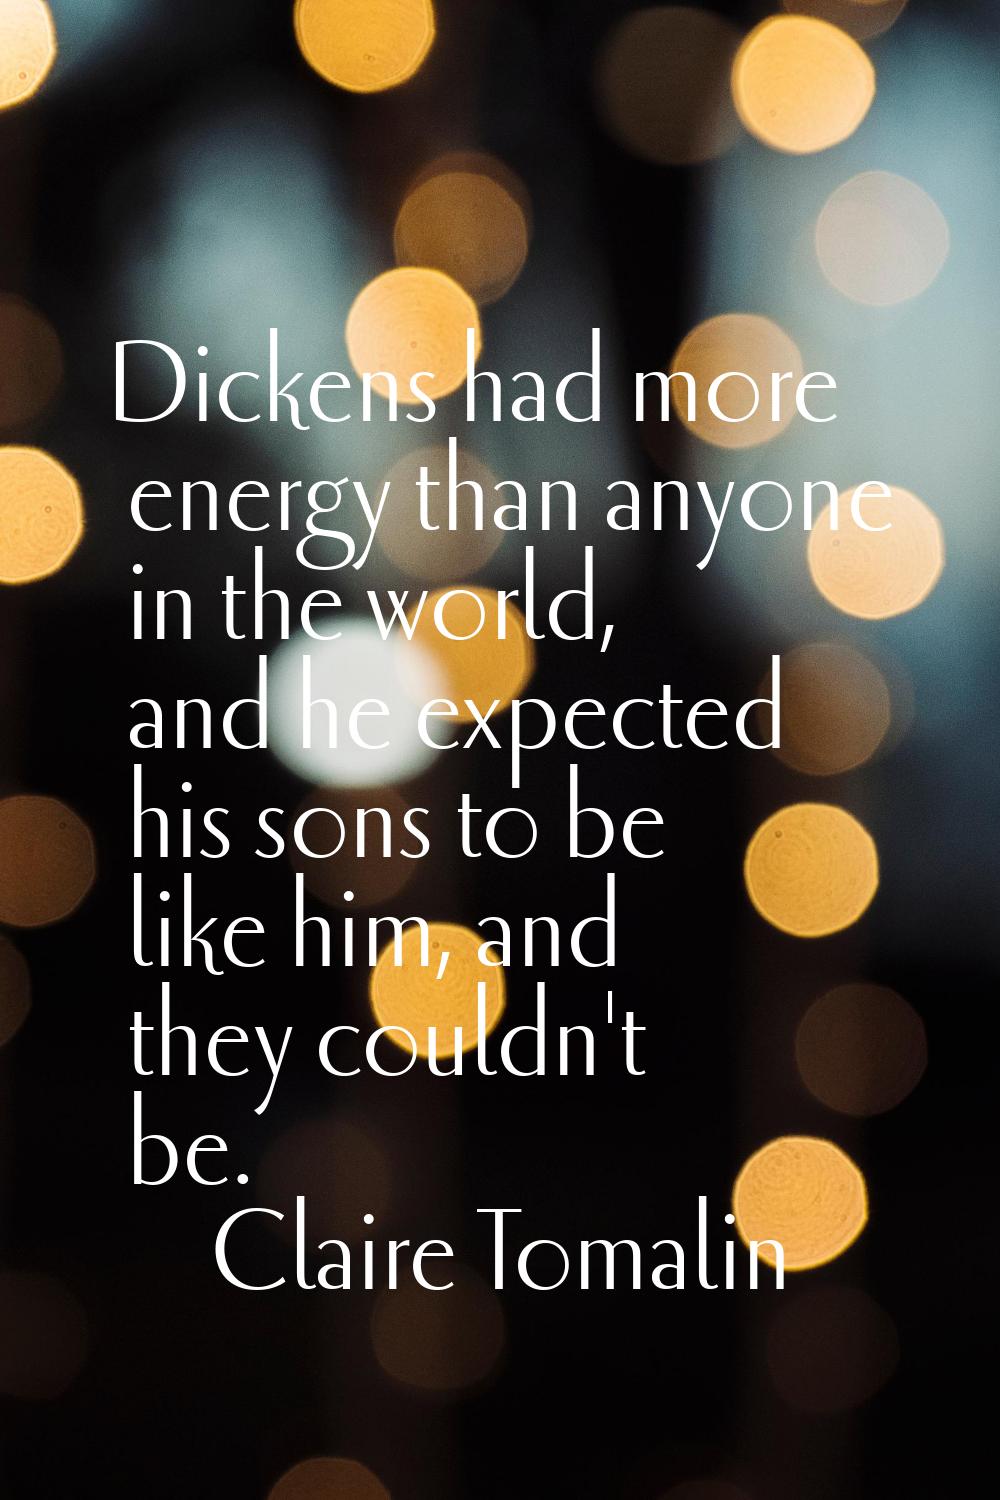 Dickens had more energy than anyone in the world, and he expected his sons to be like him, and they